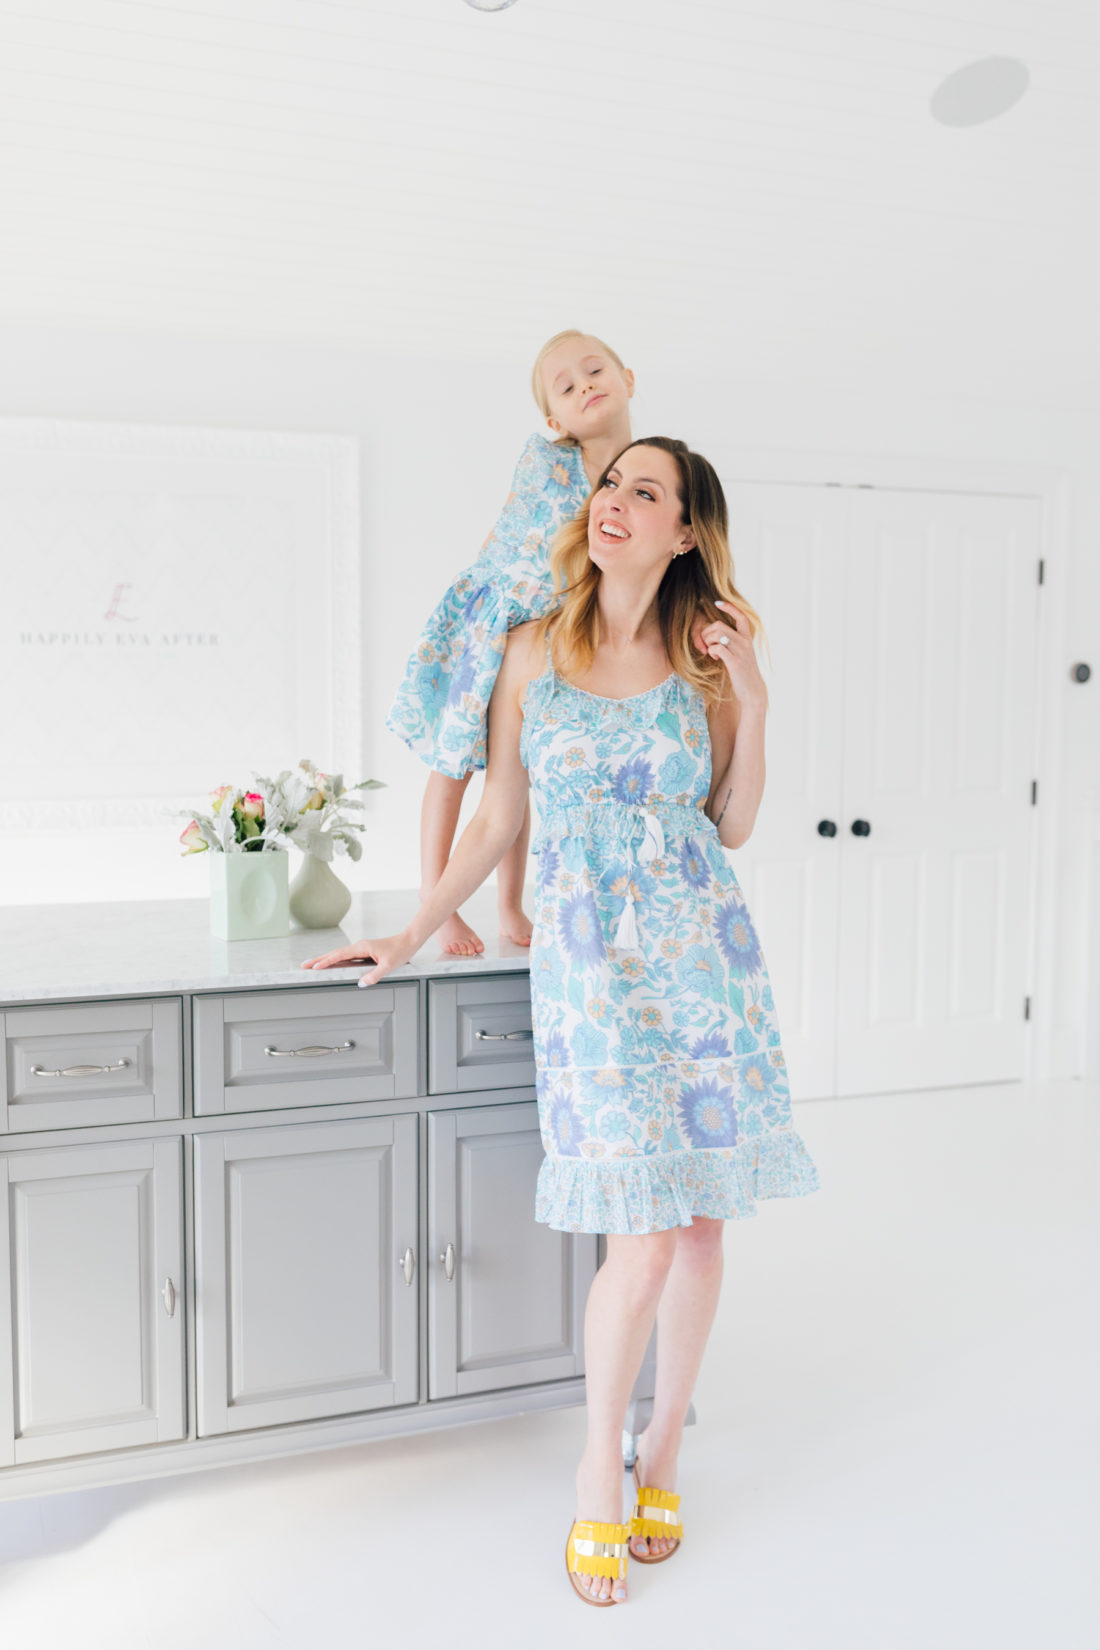 Eva Amurri Martino stands in a floral ruffle dress in the studio of her connecticut home with four year old daughter Marlowe